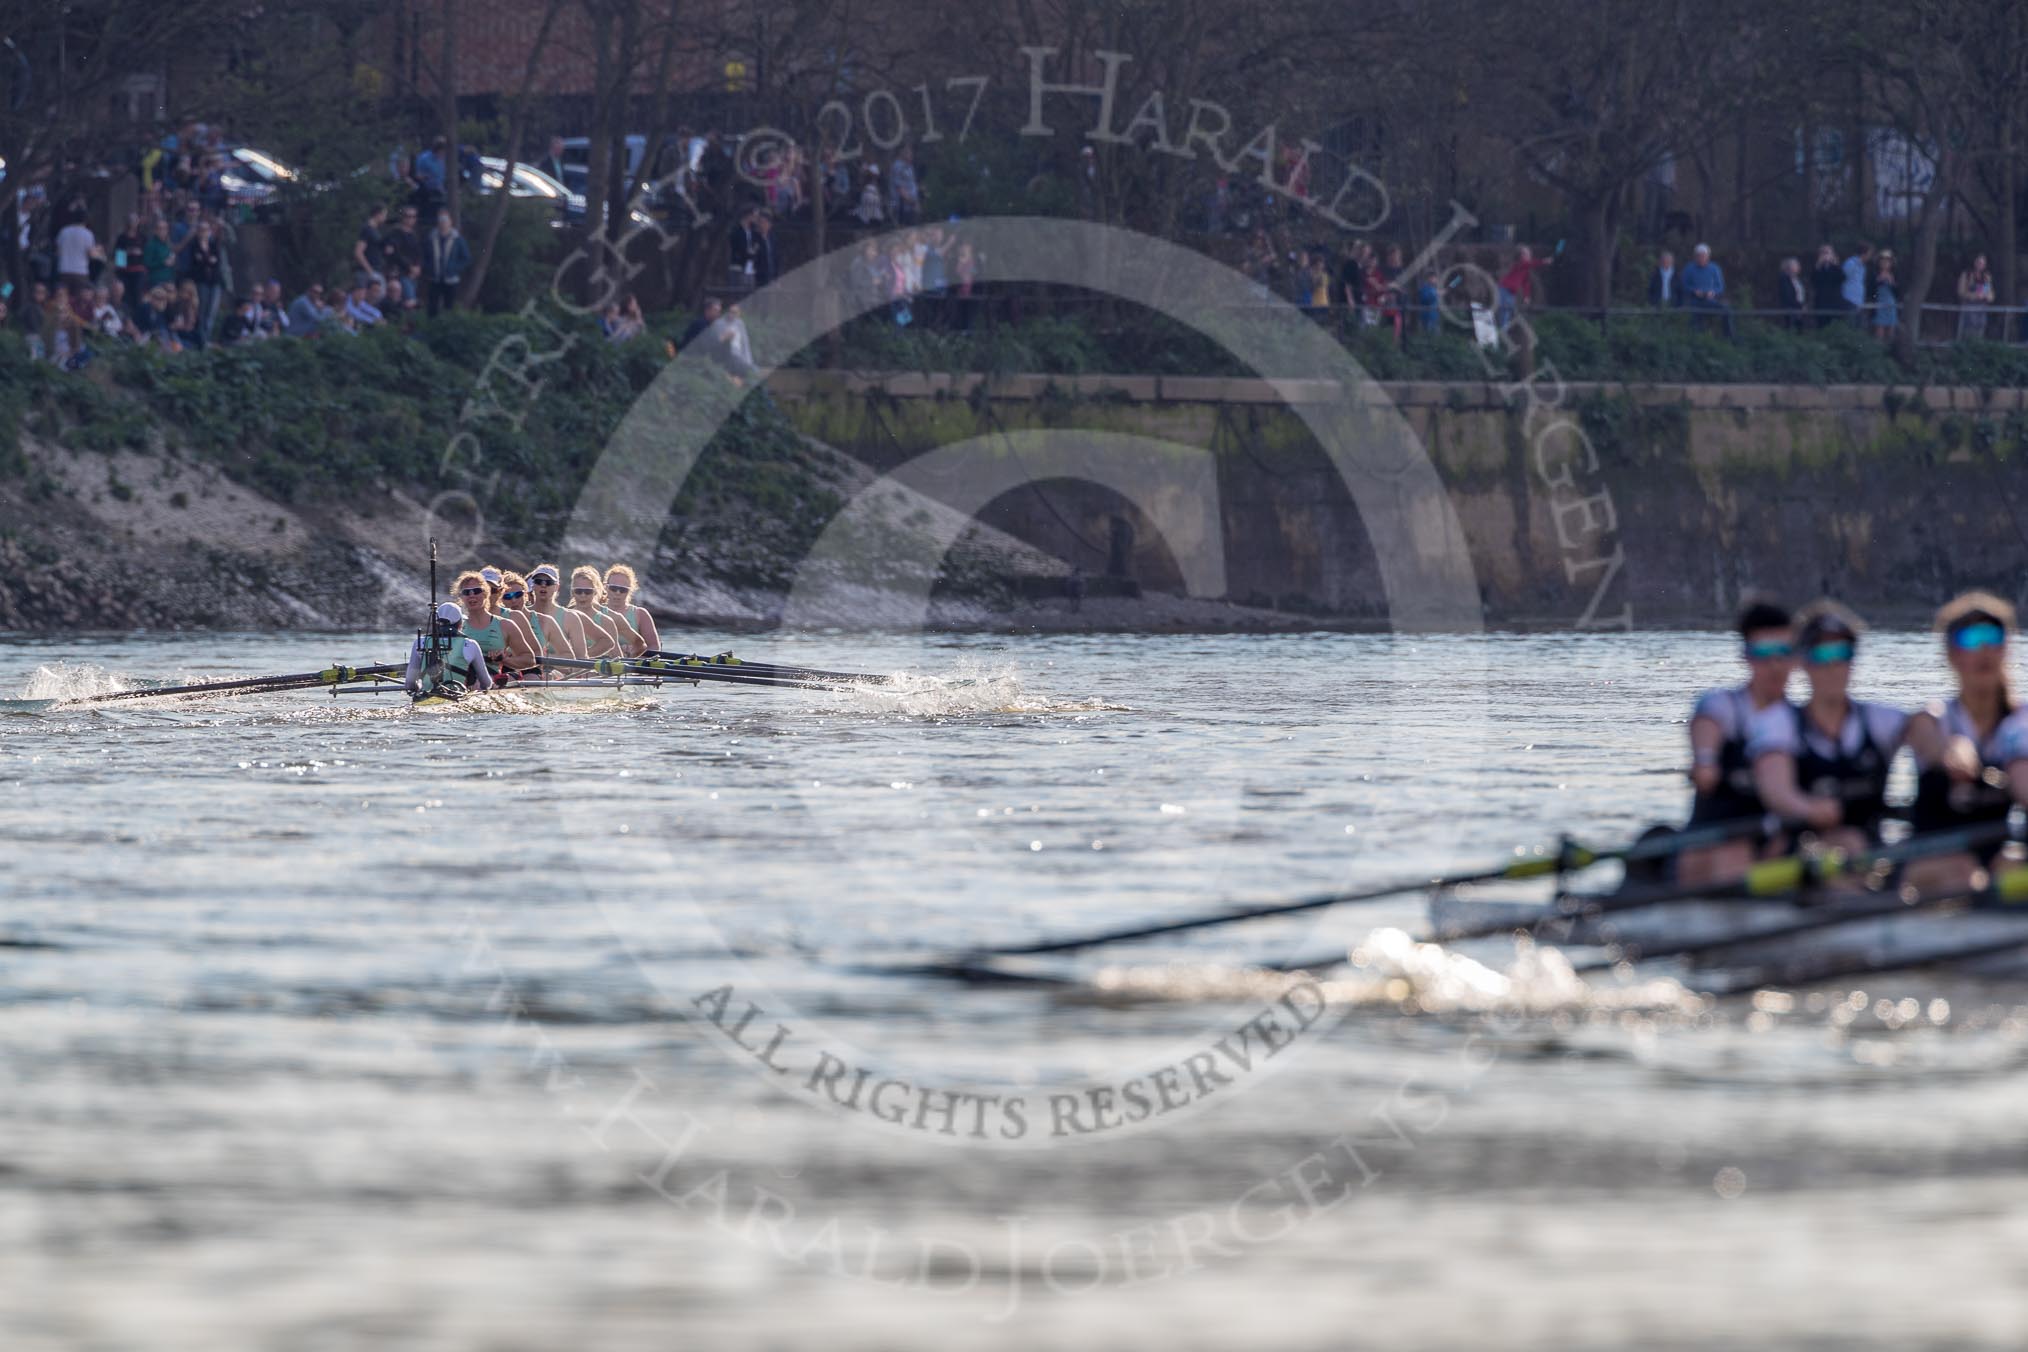 The Boat Race season 2017 -  The Cancer Research Women's Boat Race: The long lens compresses the distance, Cambridge is still in a comfortable lead at the White Hart pub, Mortlake.
River Thames between Putney Bridge and Mortlake,
London SW15,

United Kingdom,
on 02 April 2017 at 16:51, image #178